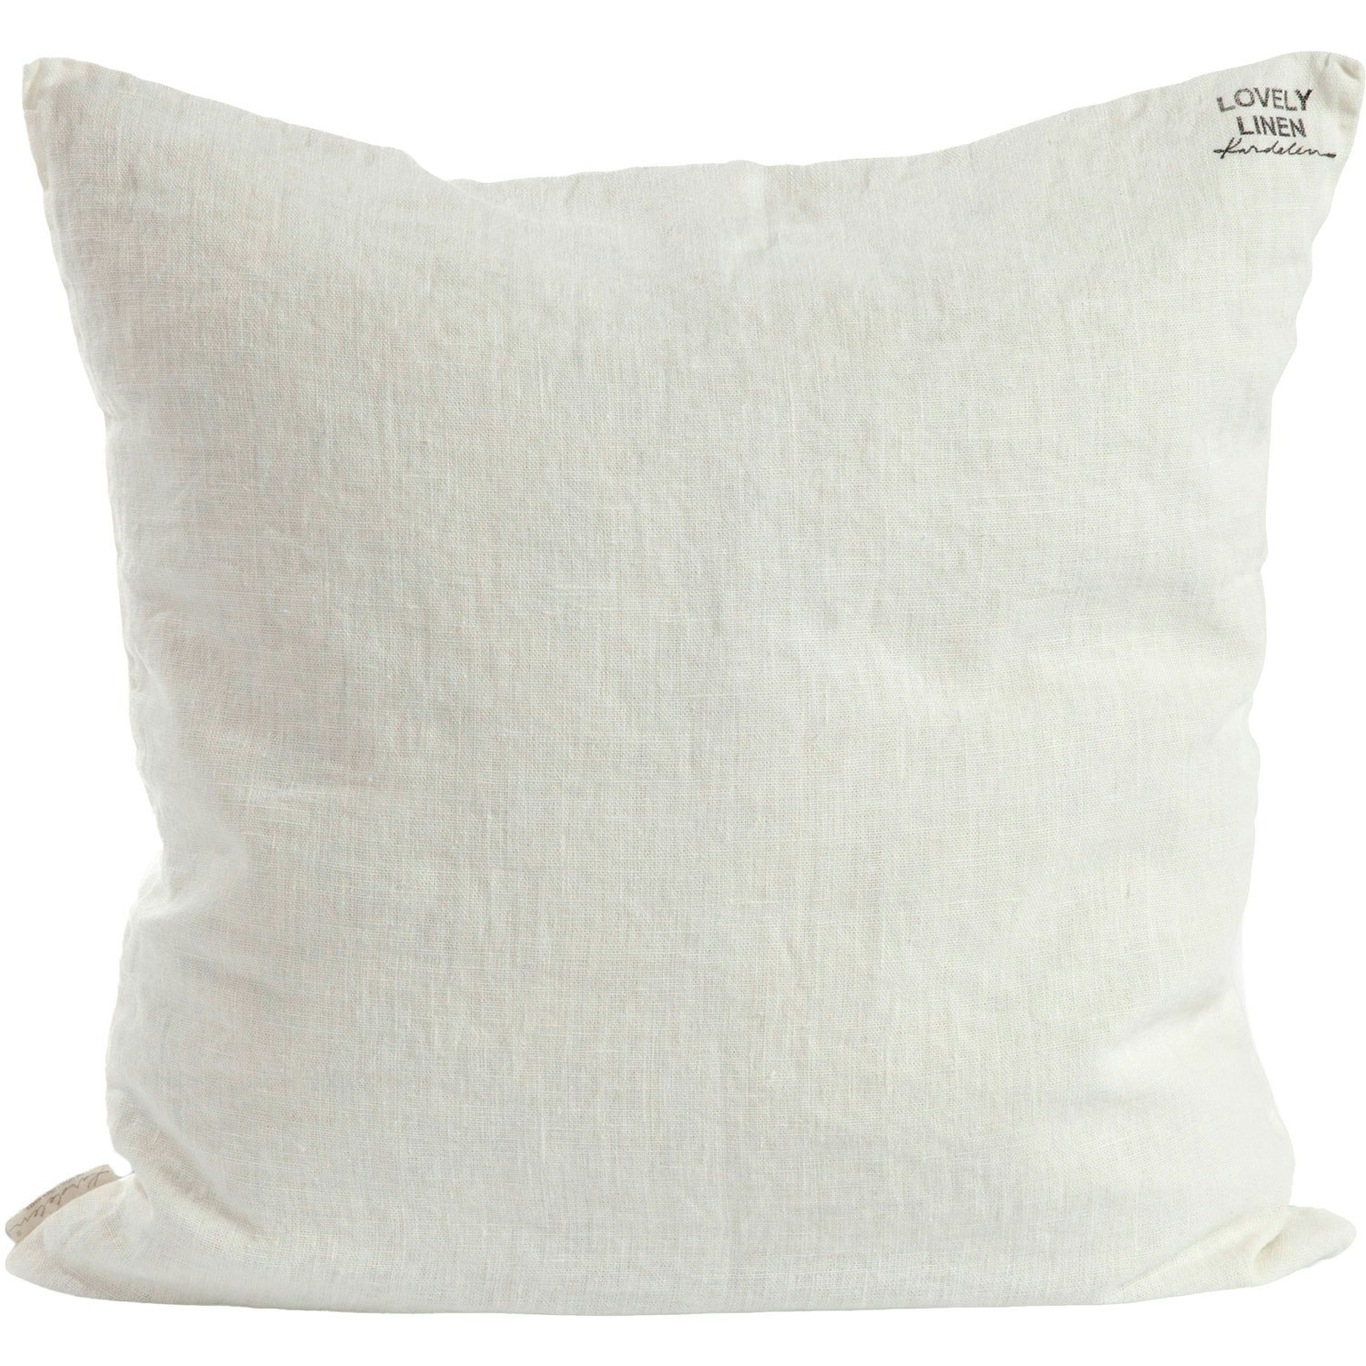 Lovely Cushion Cover 60x60 cm, Off-white